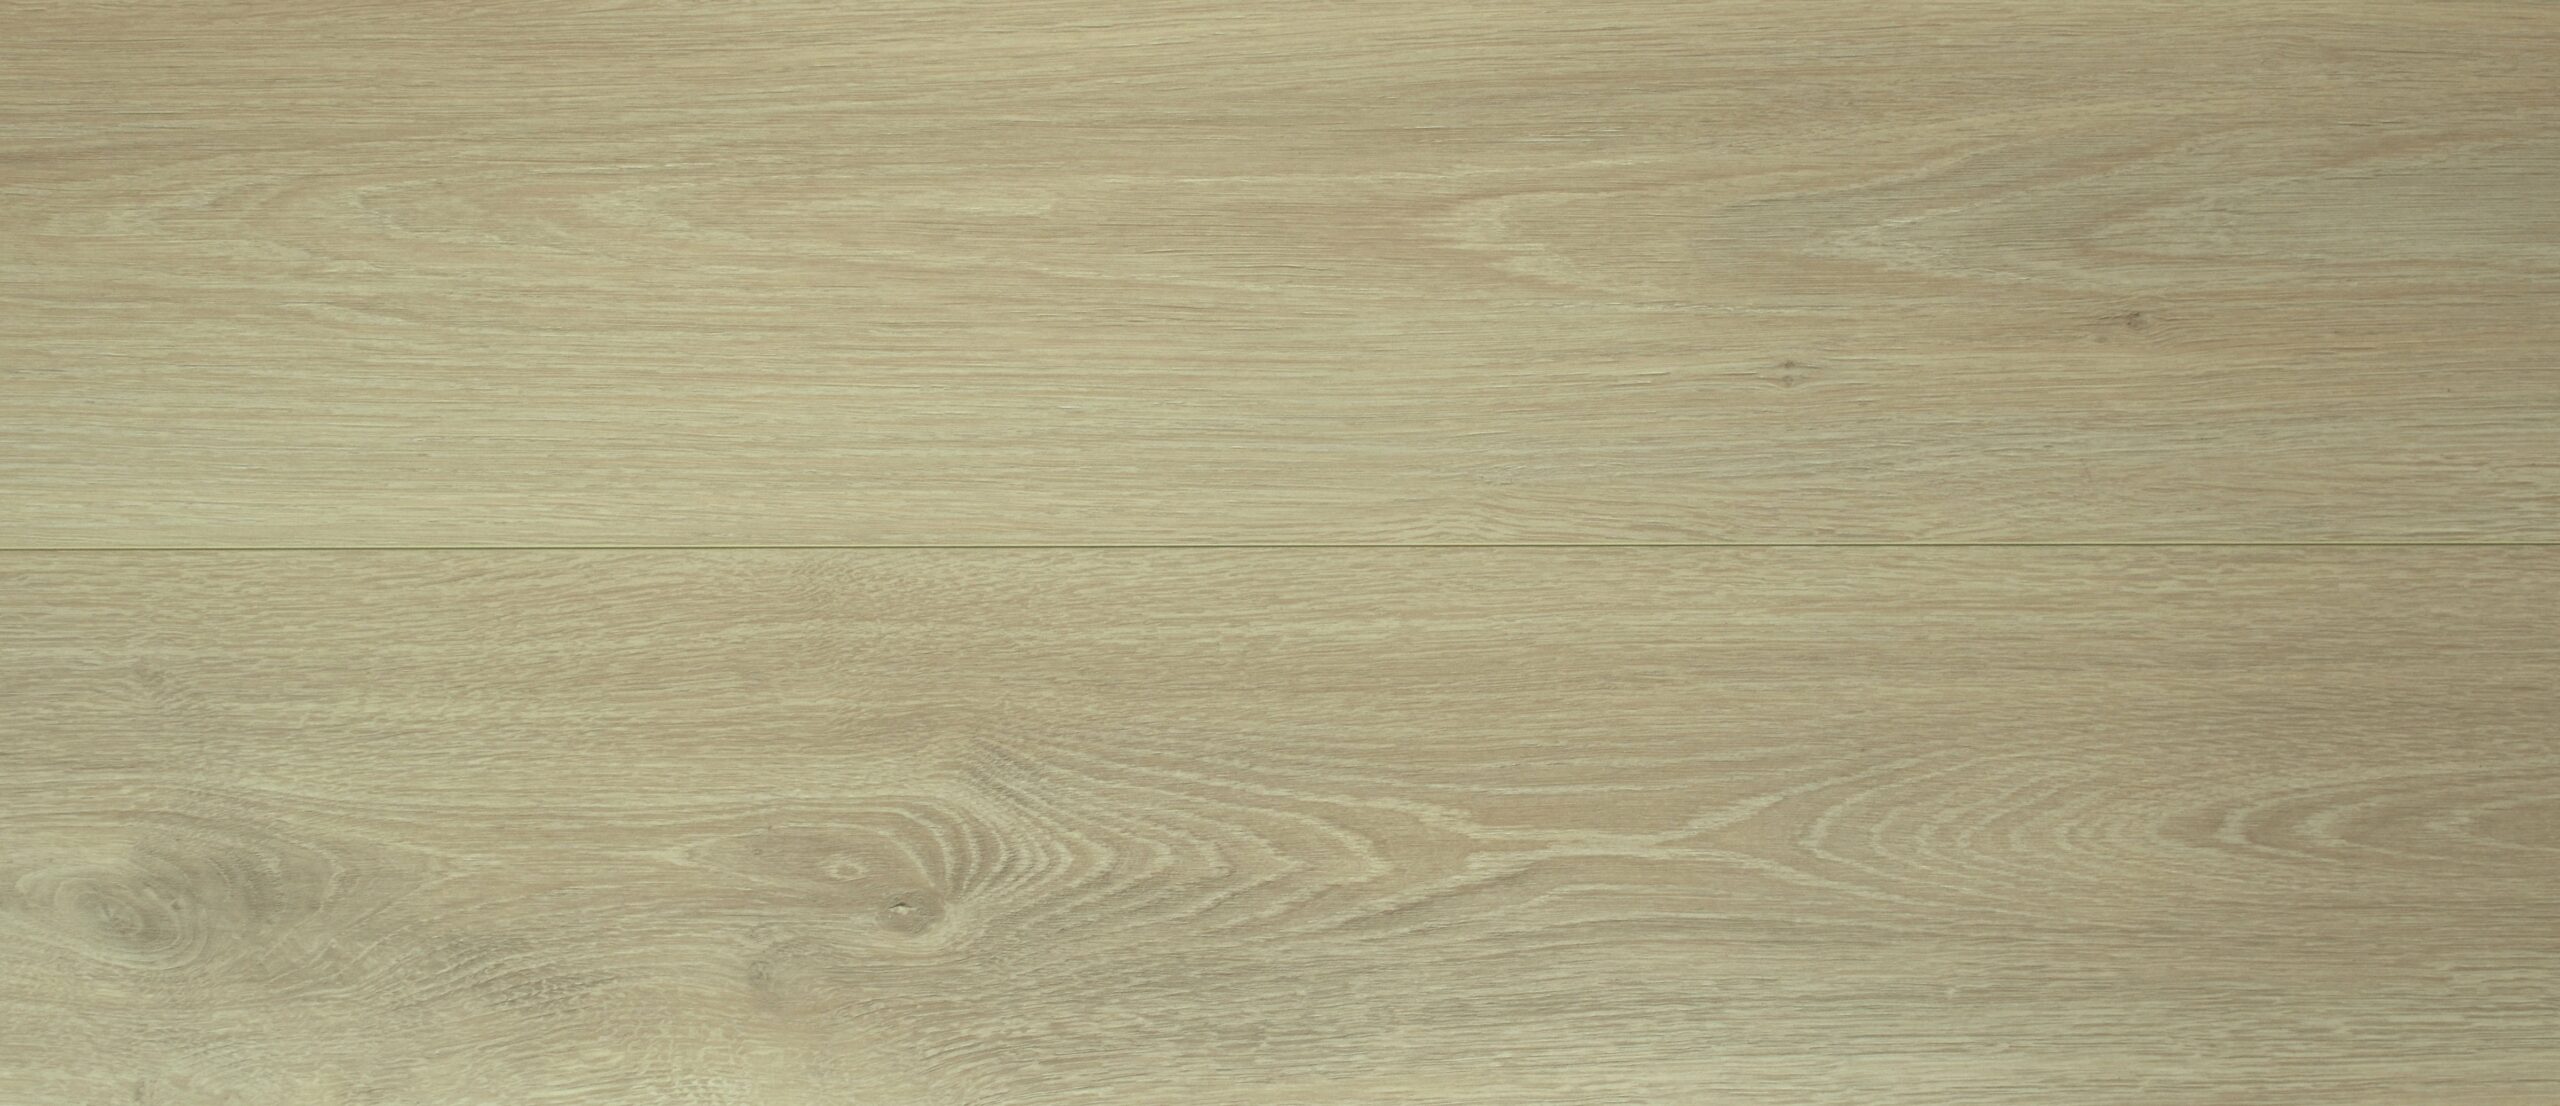 Light Oak Trident Laminate Flooring with Built-In EIR Backing and AC4 wear layer